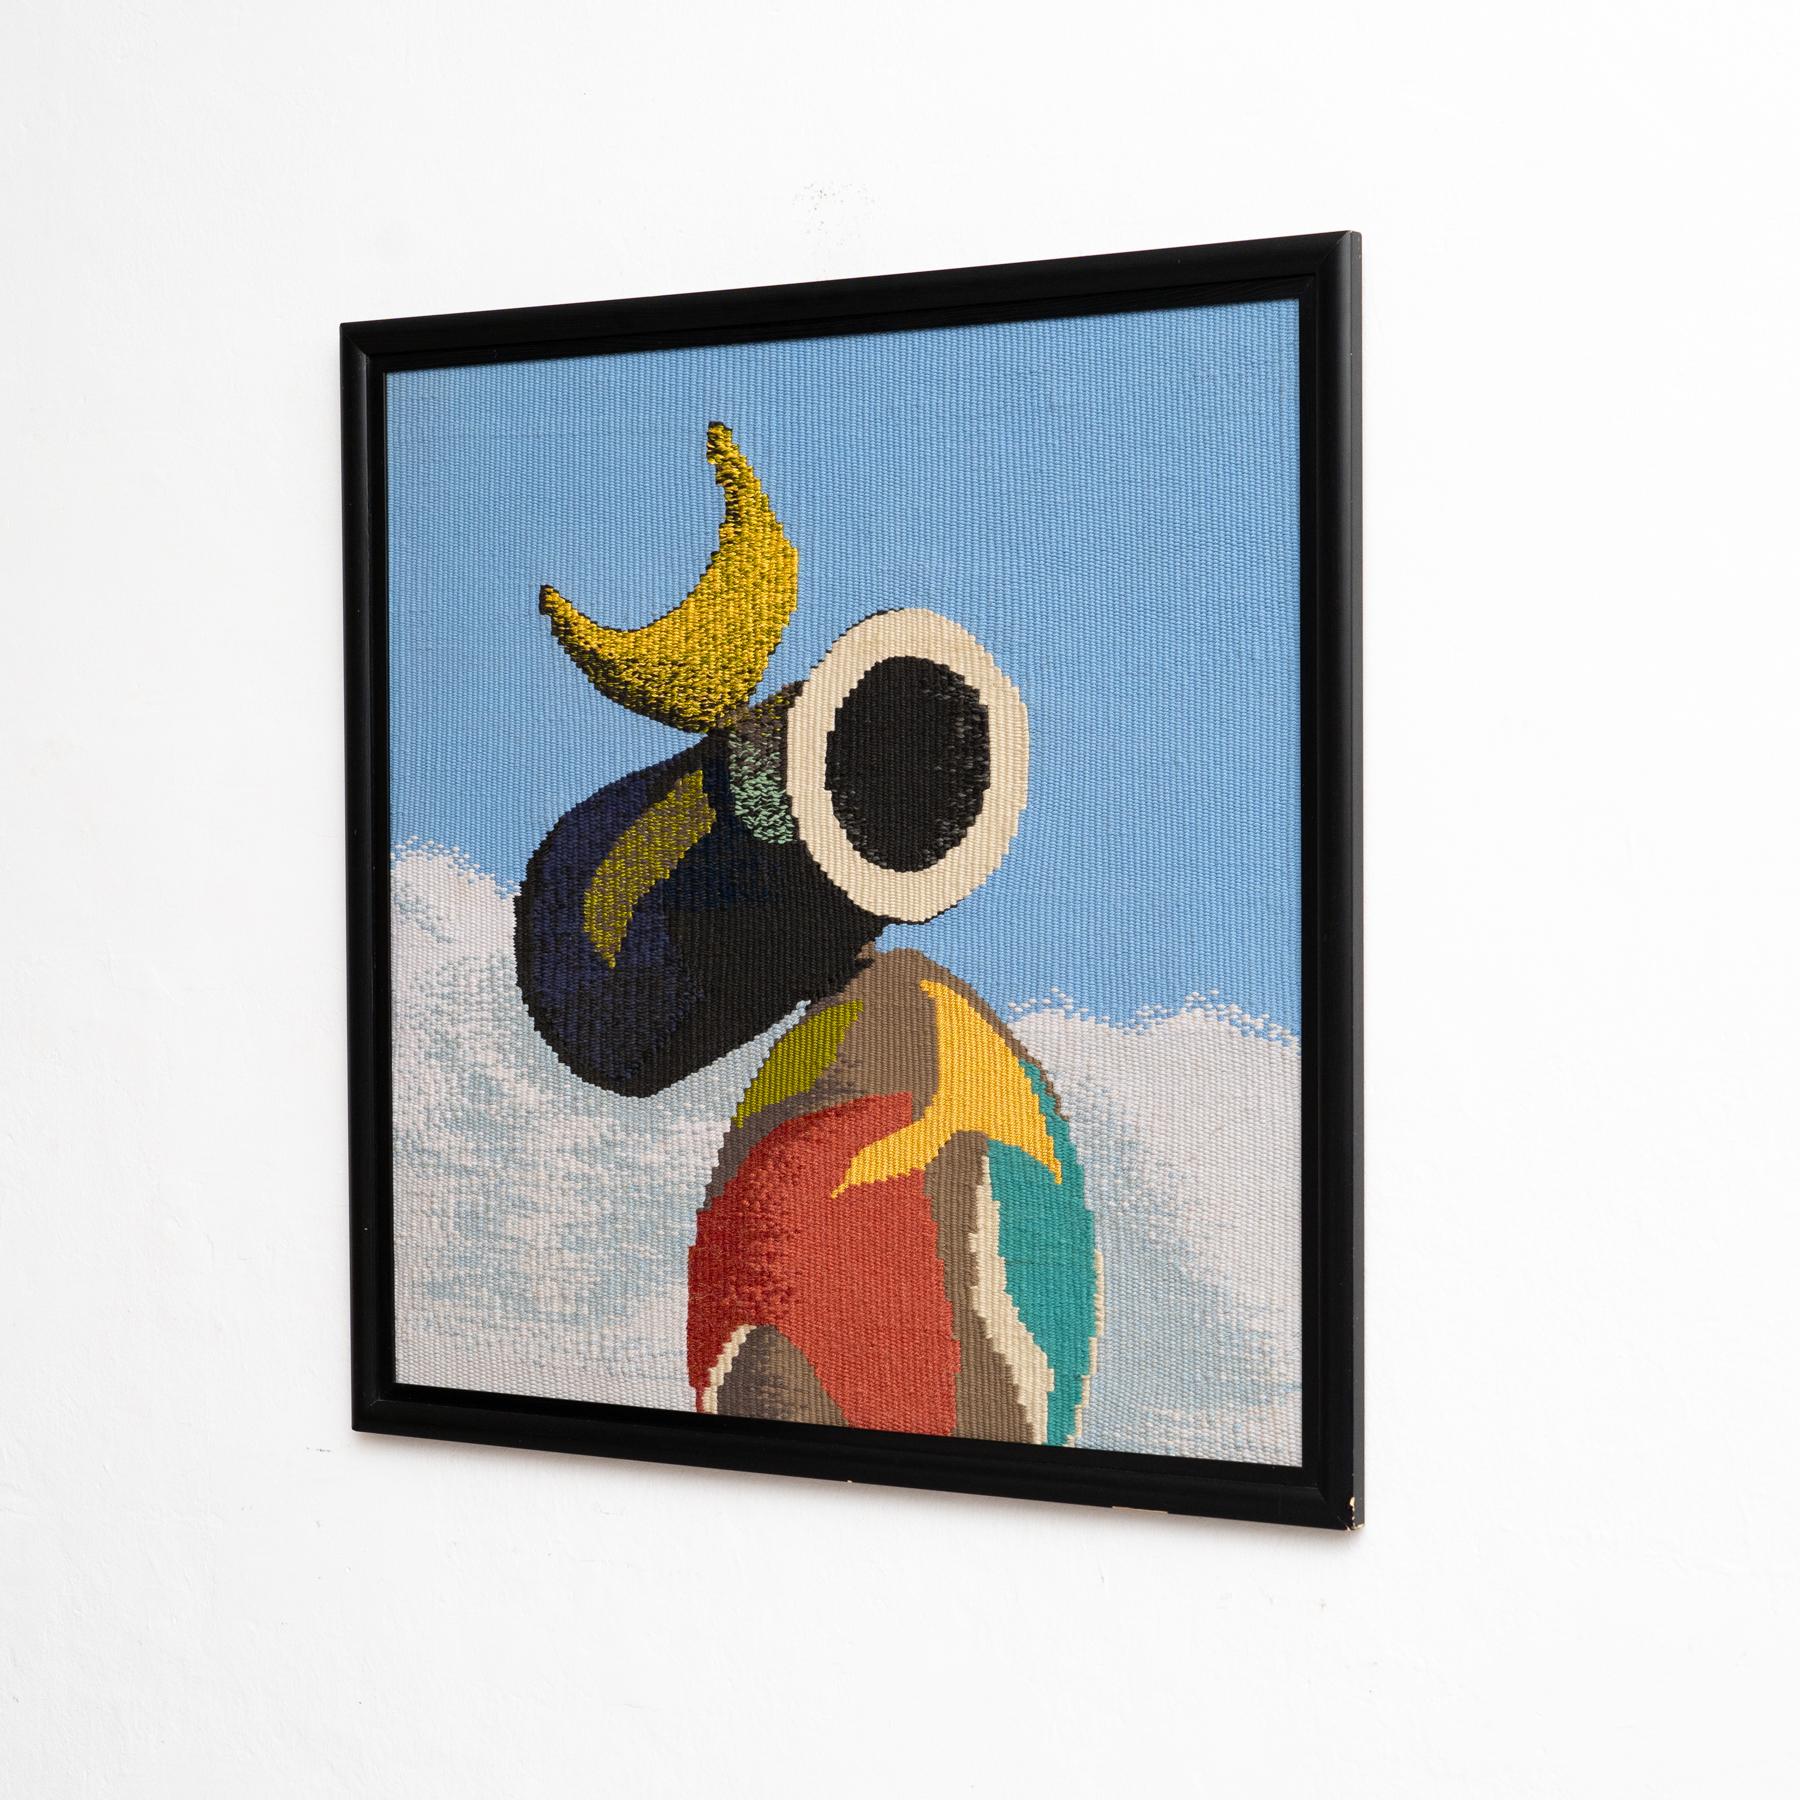 Spanish Tapestry Tribute to Joan Miró's 'Woman and Bird', circa 1960 For Sale